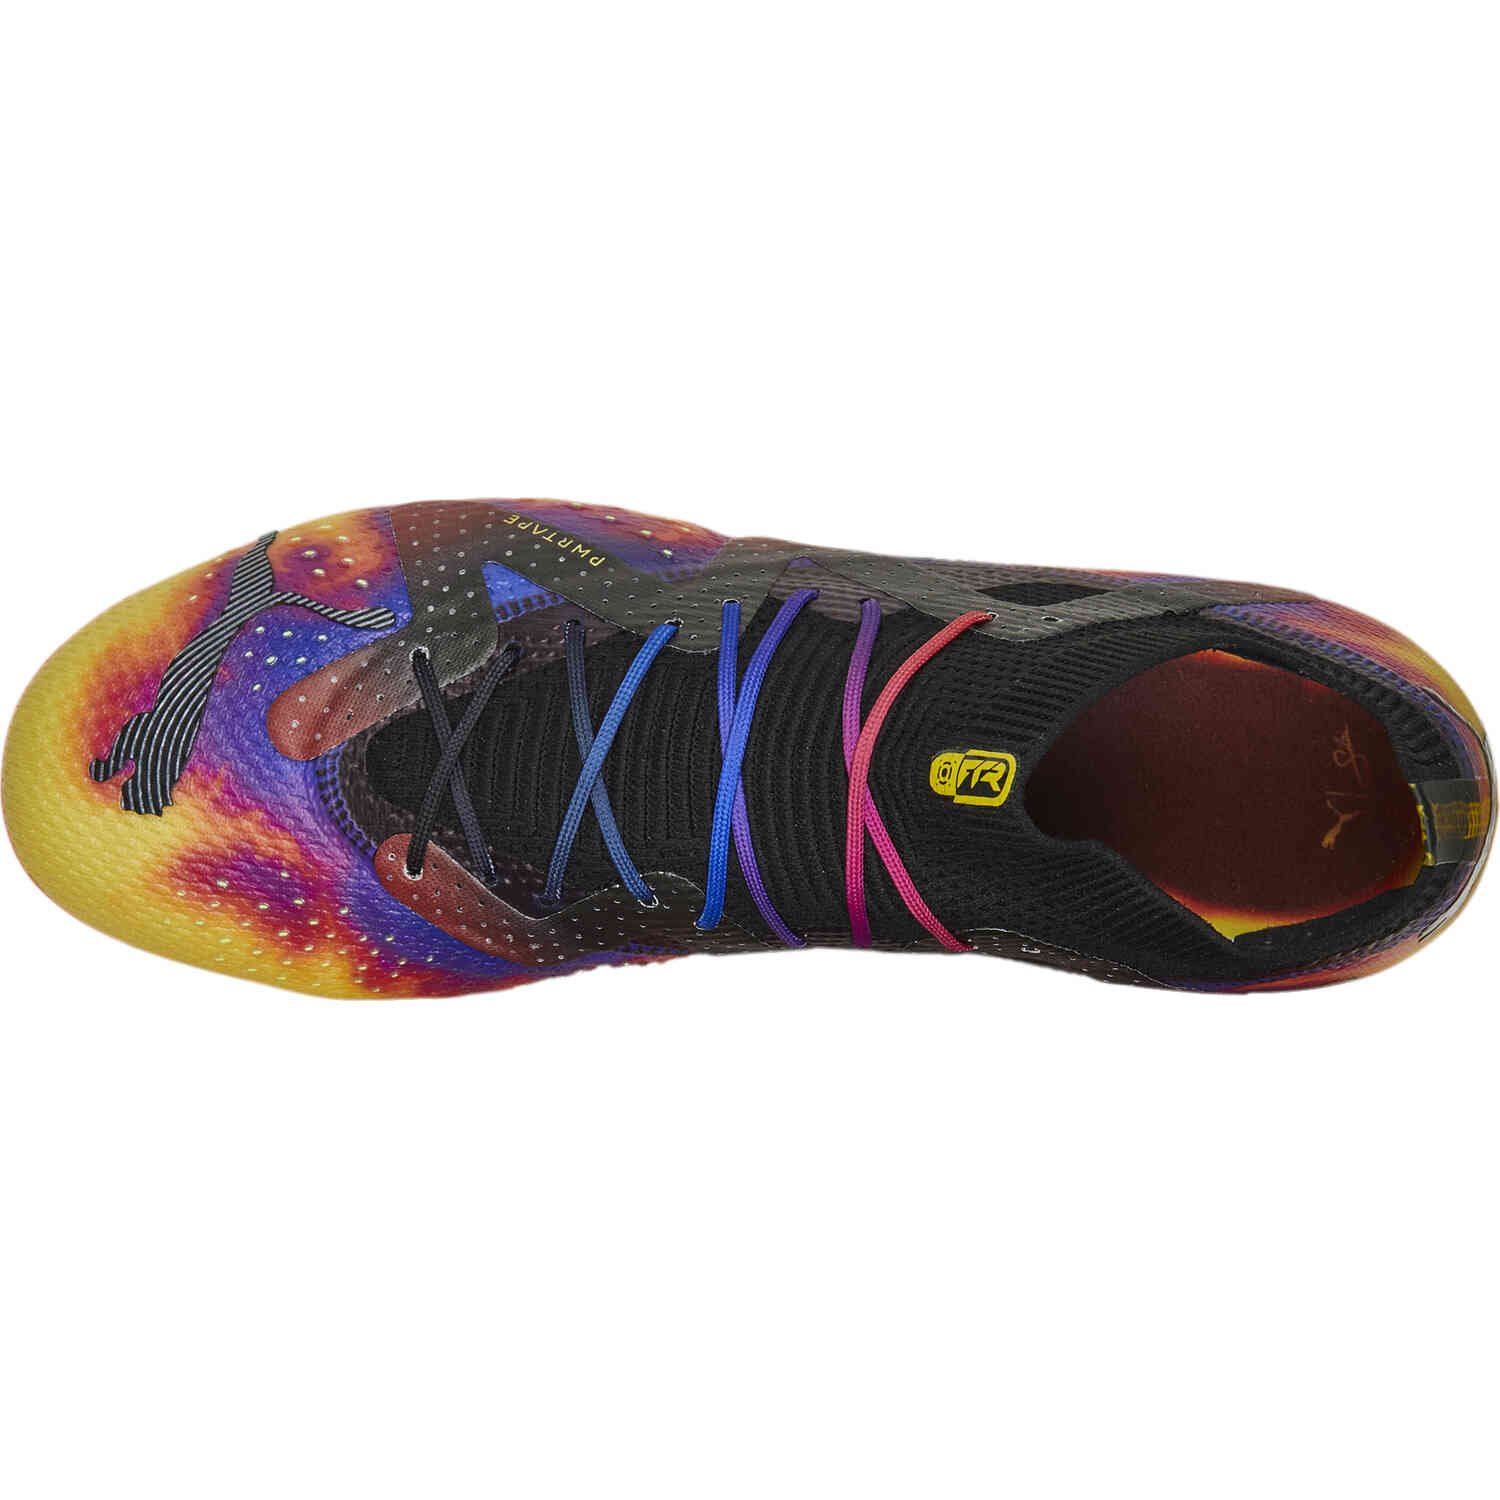 PUMA Elements Future Ultimate FG – Team Violet & Black with Yellow Sizzle with Ricki O